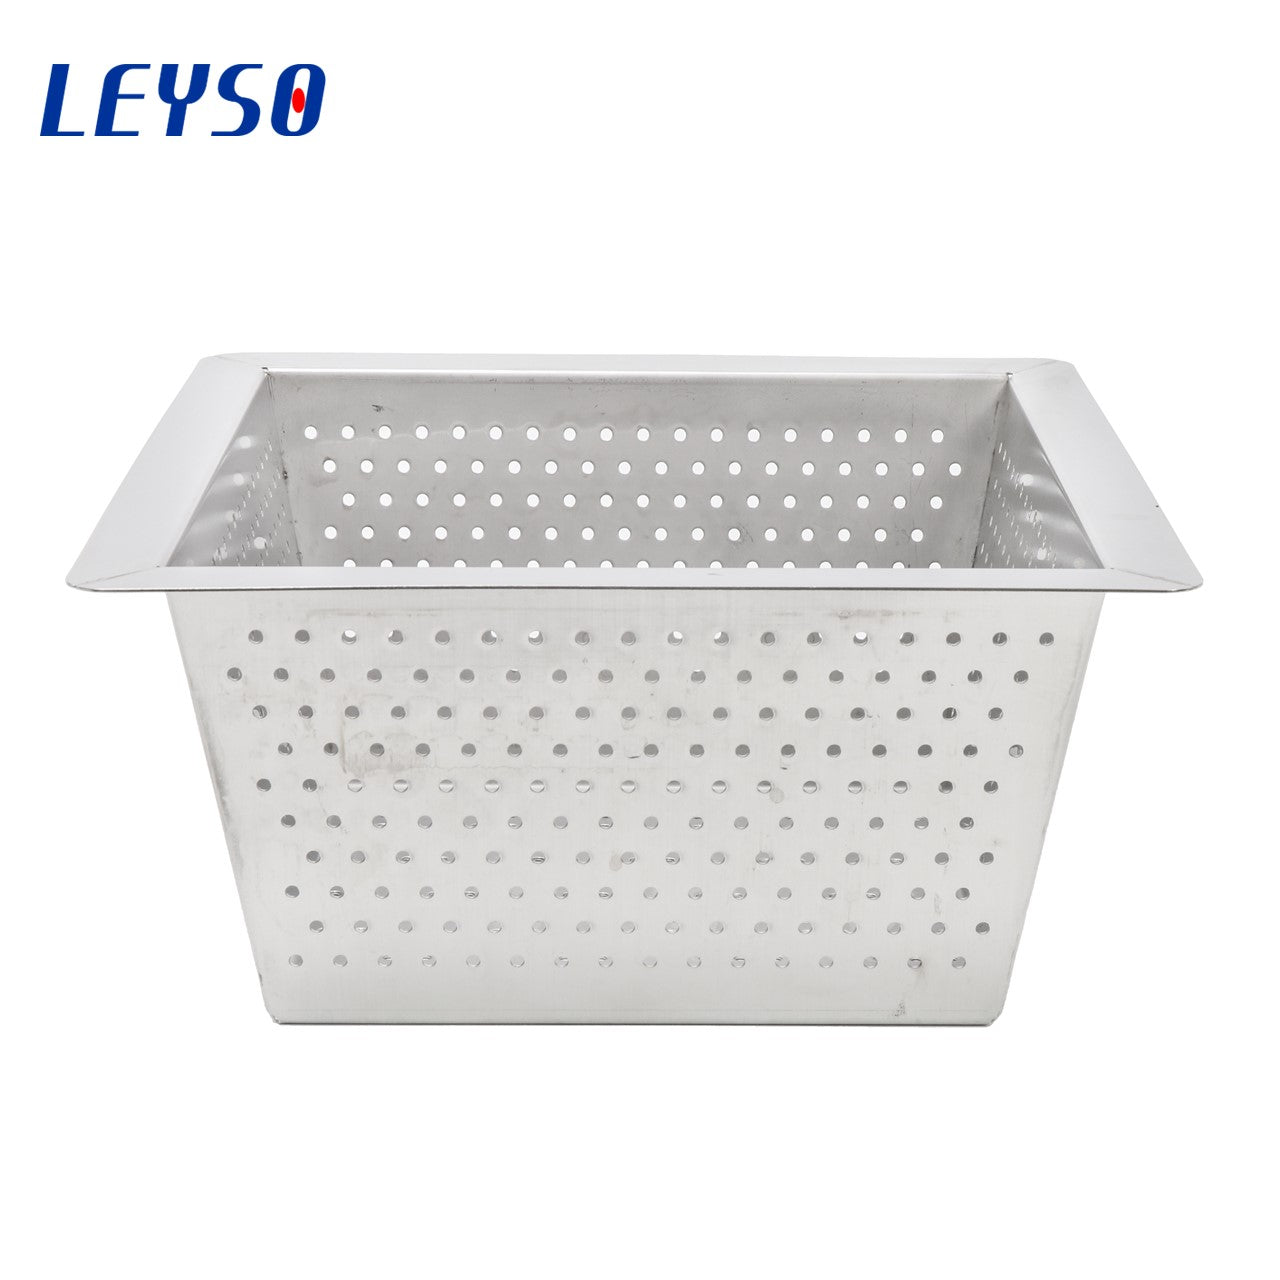 Leyso Stainless Steel Floor Sink Top Hang Basket Strainer Sink Drain Cover 10” x 10” x 4-3/4” for Kitchen, Restaurant, Bar, Buffet